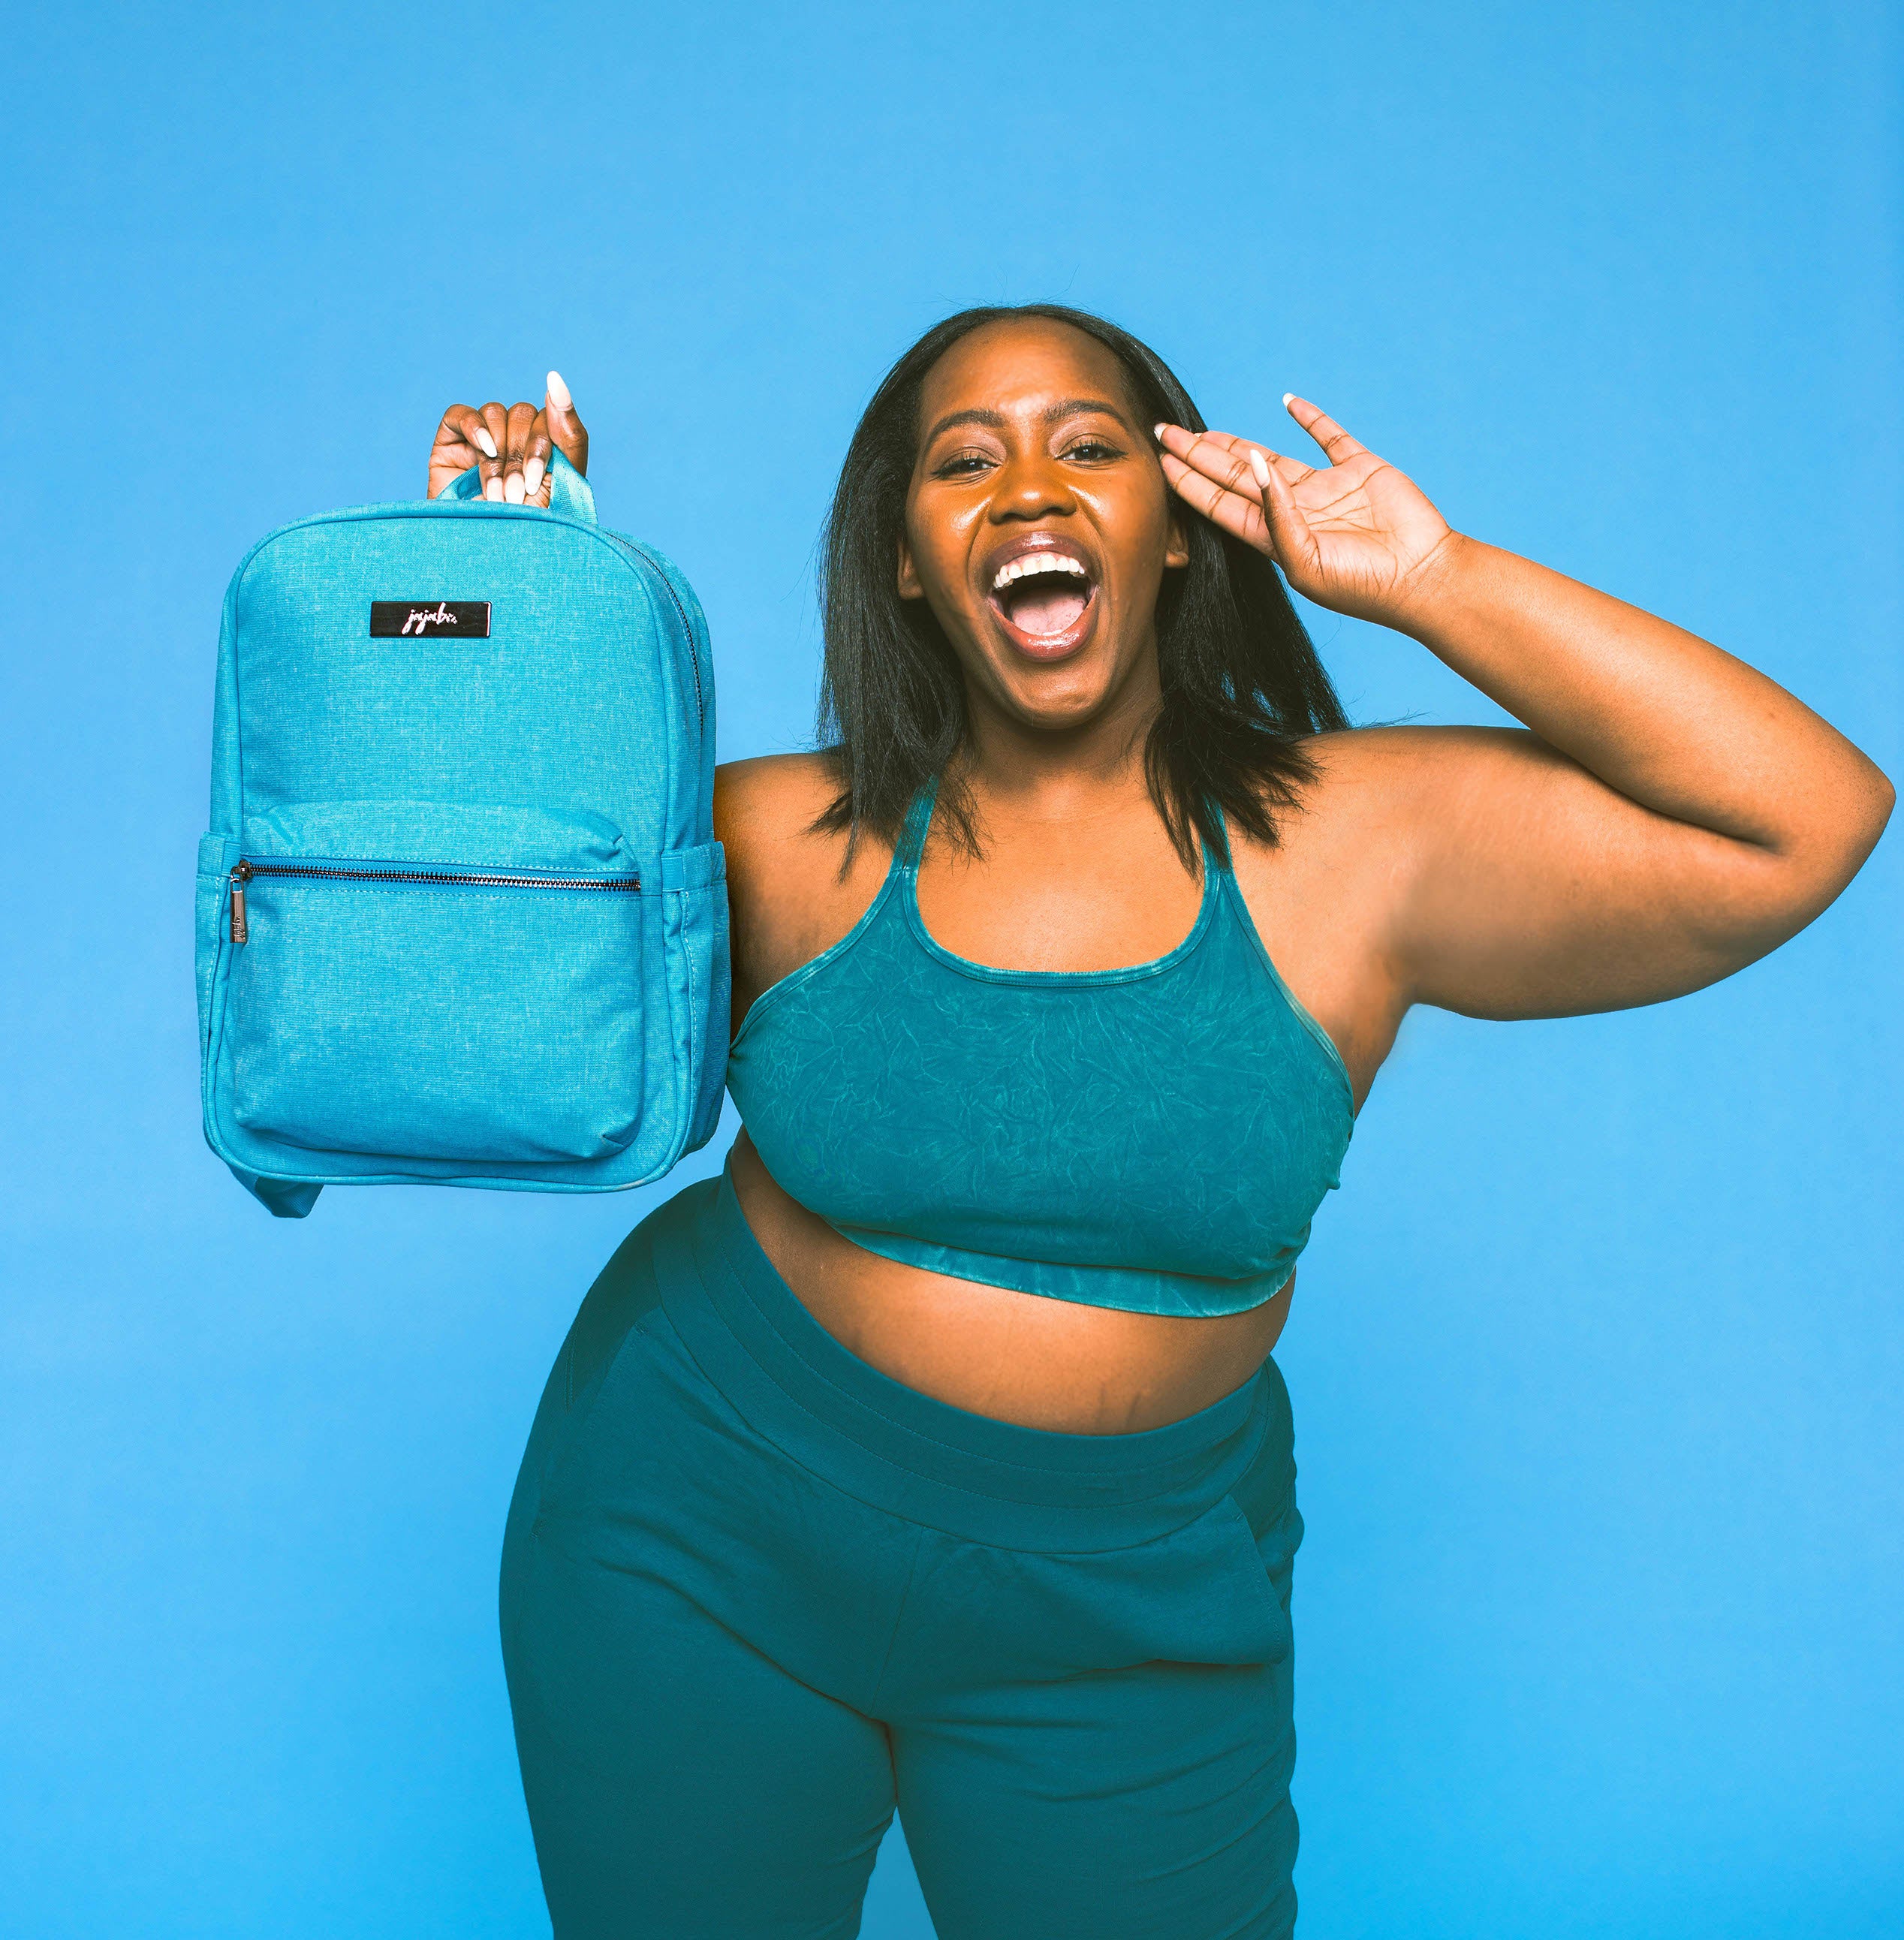 Bright Blue Midi Backpack Held by woman wearing matching colored workout gear